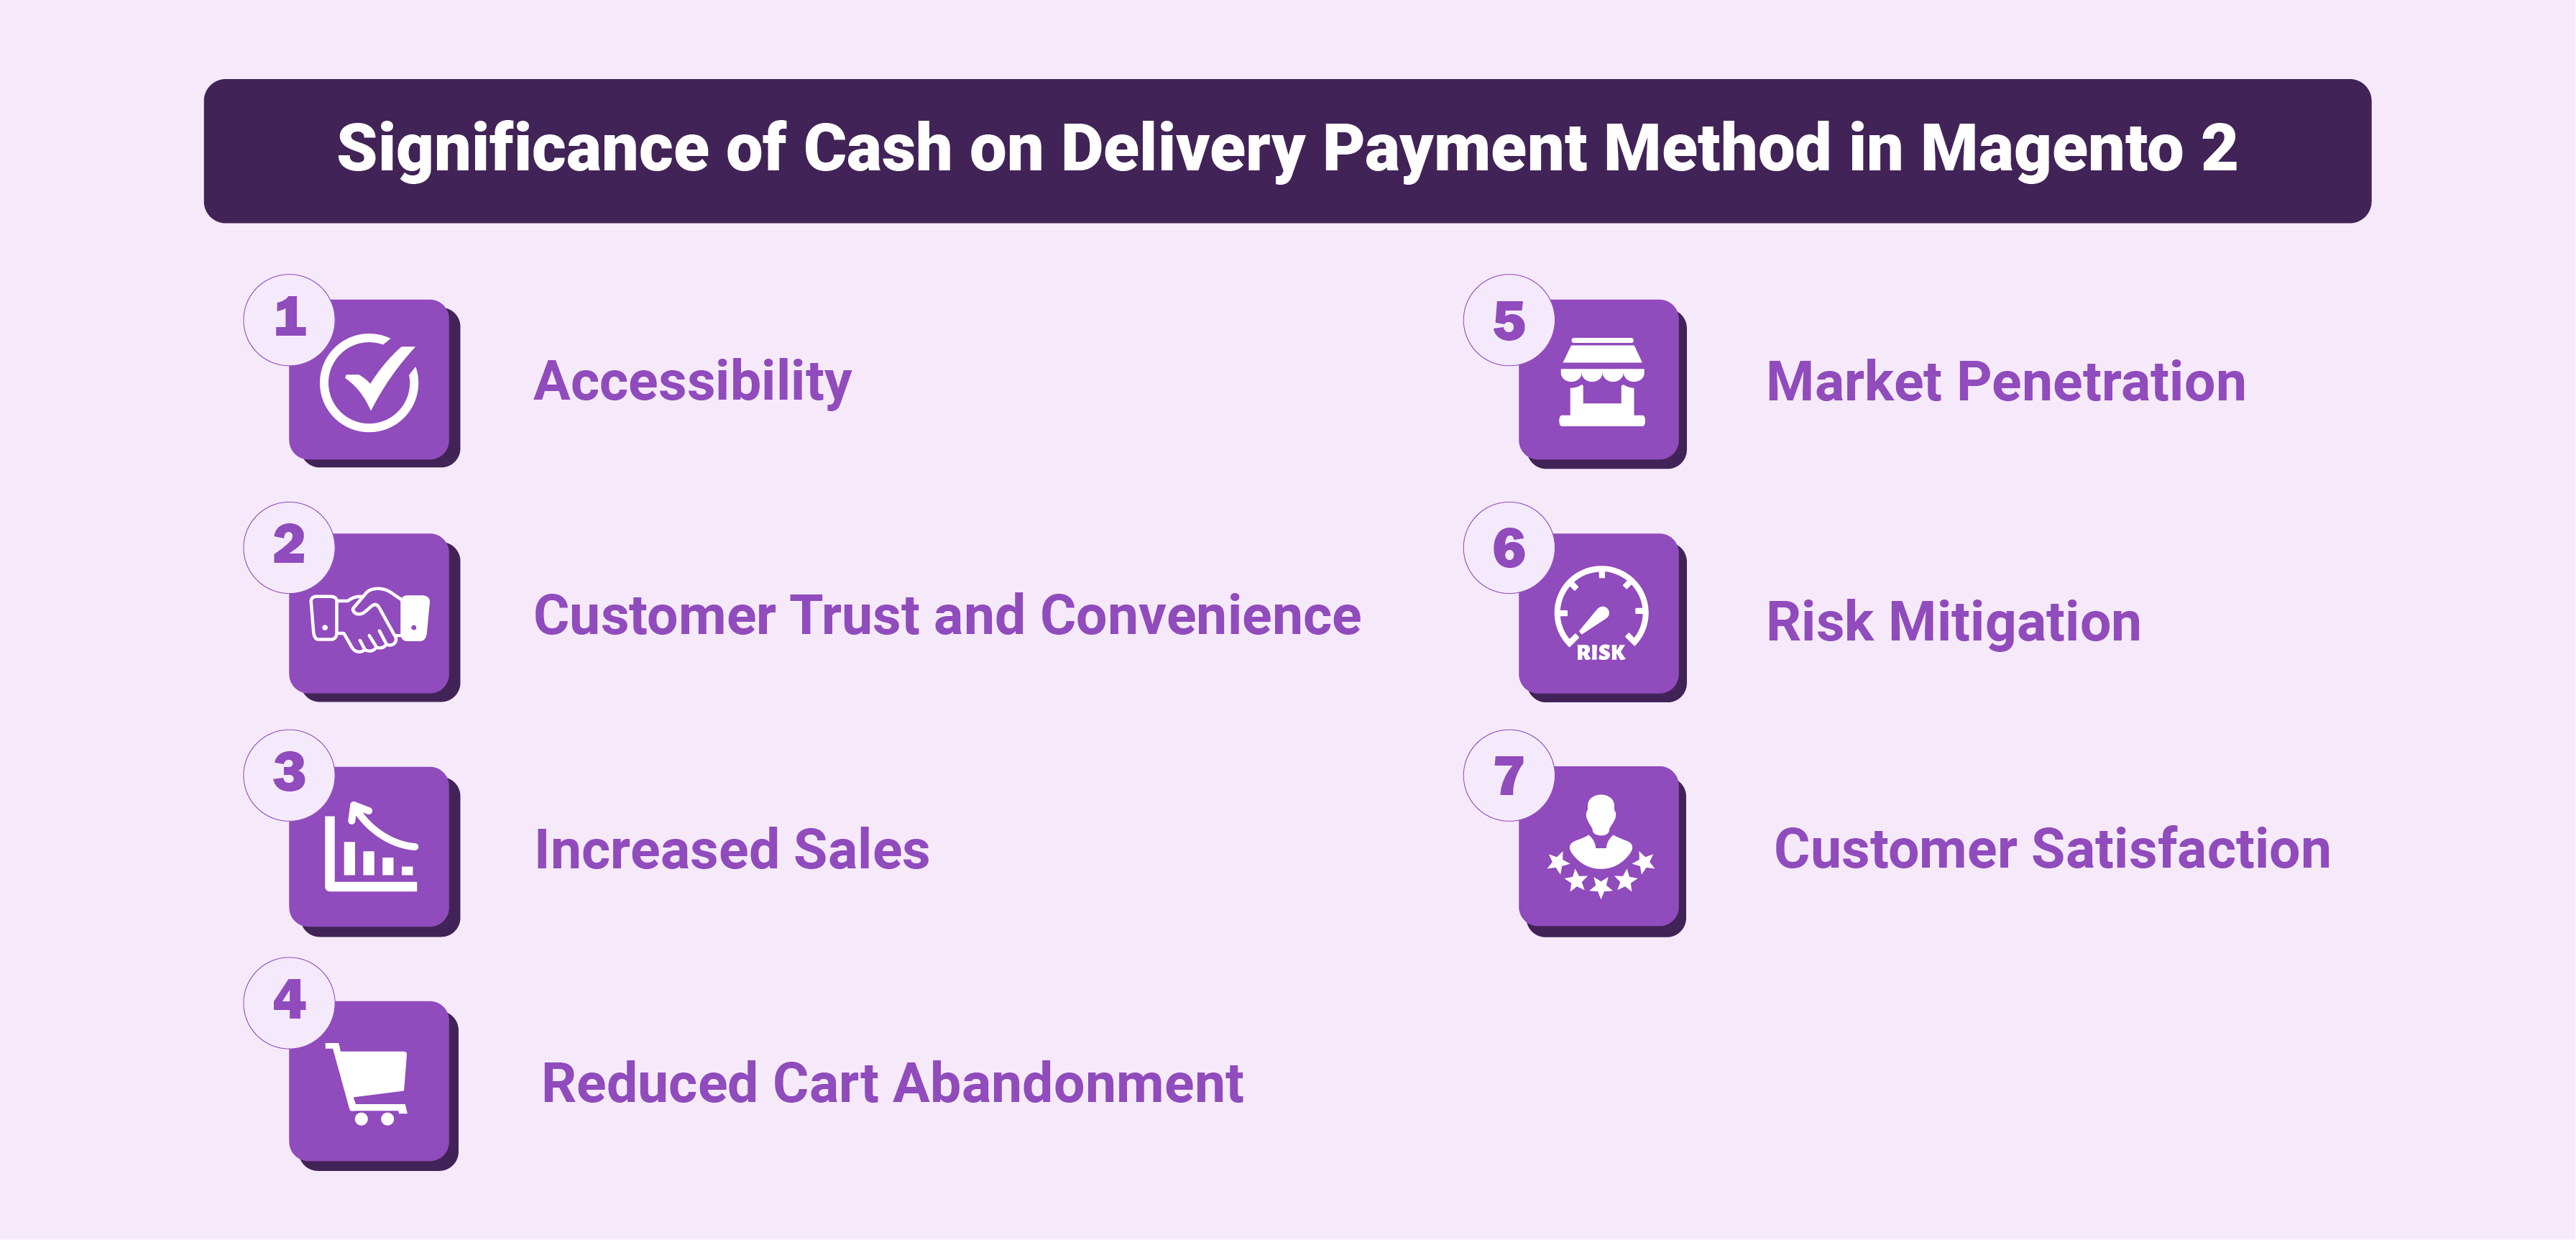 Significance of Cash on Delivery Payment Method in Magento 2